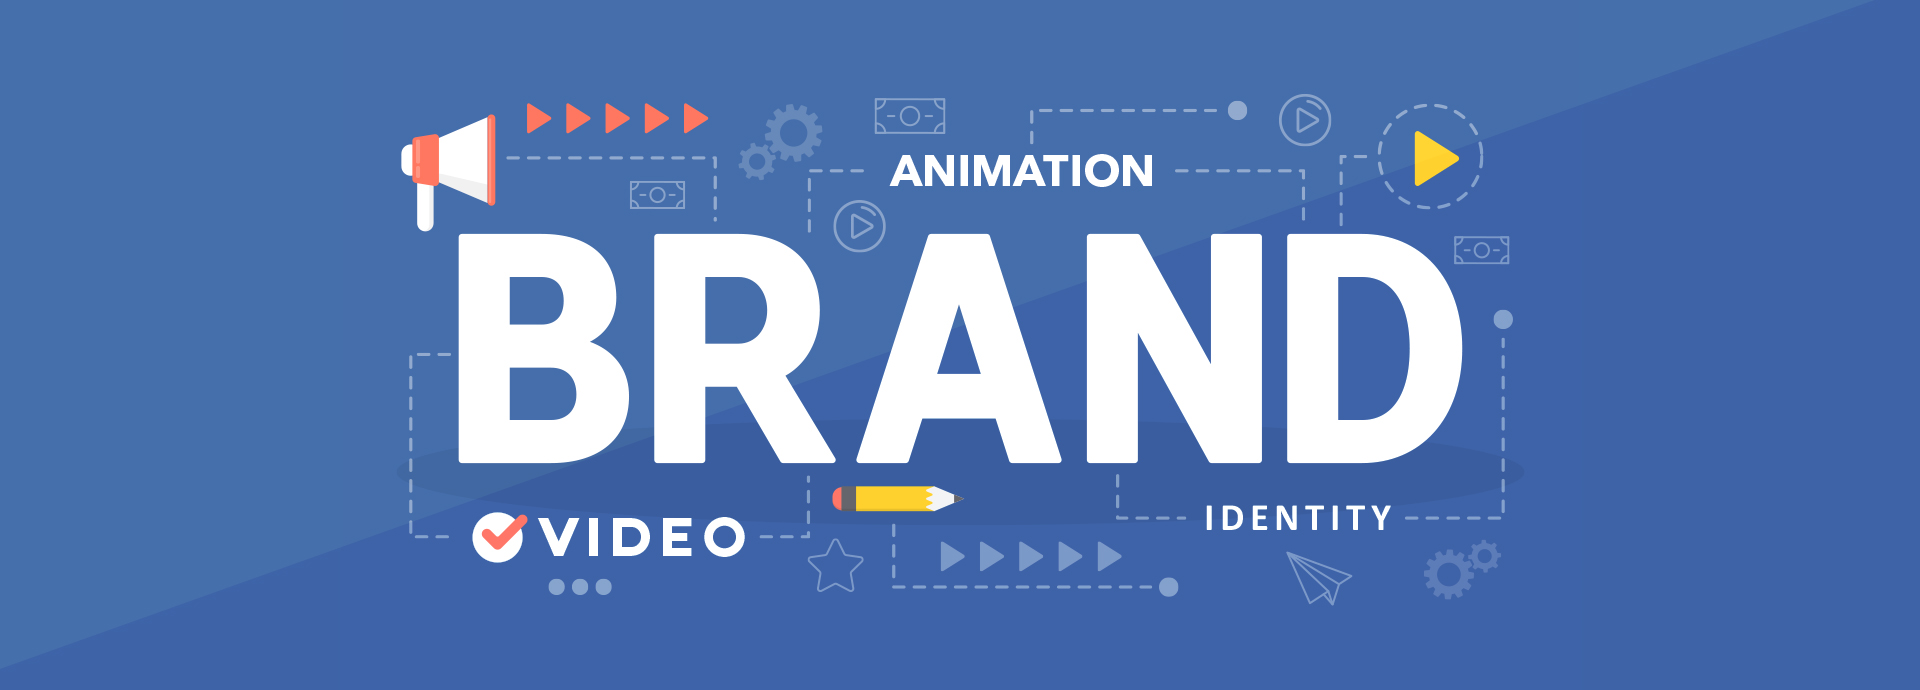 Creating Brand Identity with an Animated Marketing Video | Ripple Animation